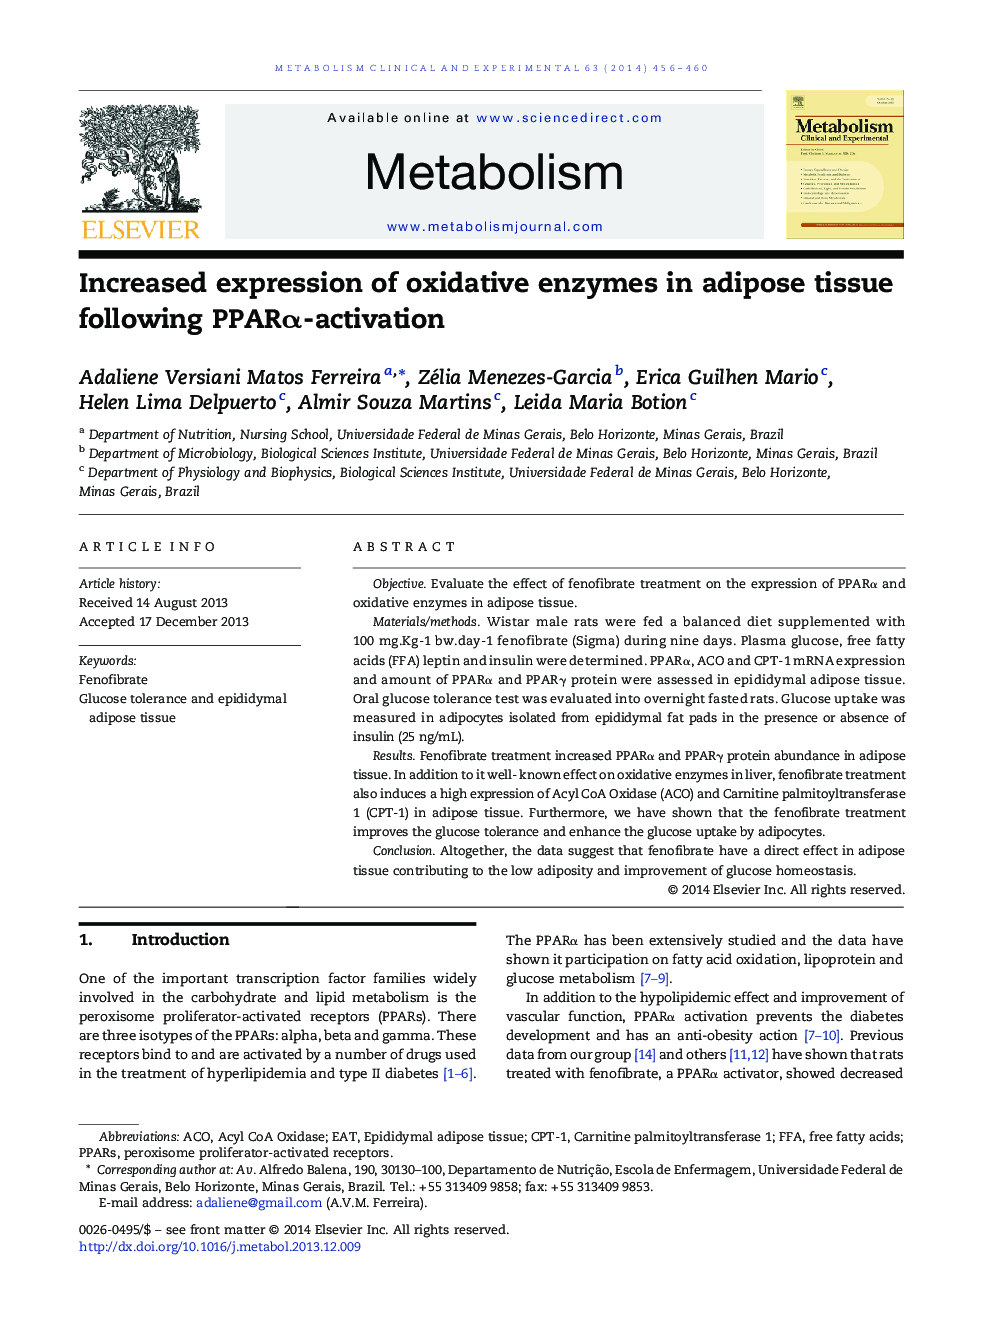 Increased expression of oxidative enzymes in adipose tissue following PPARÎ±-activation